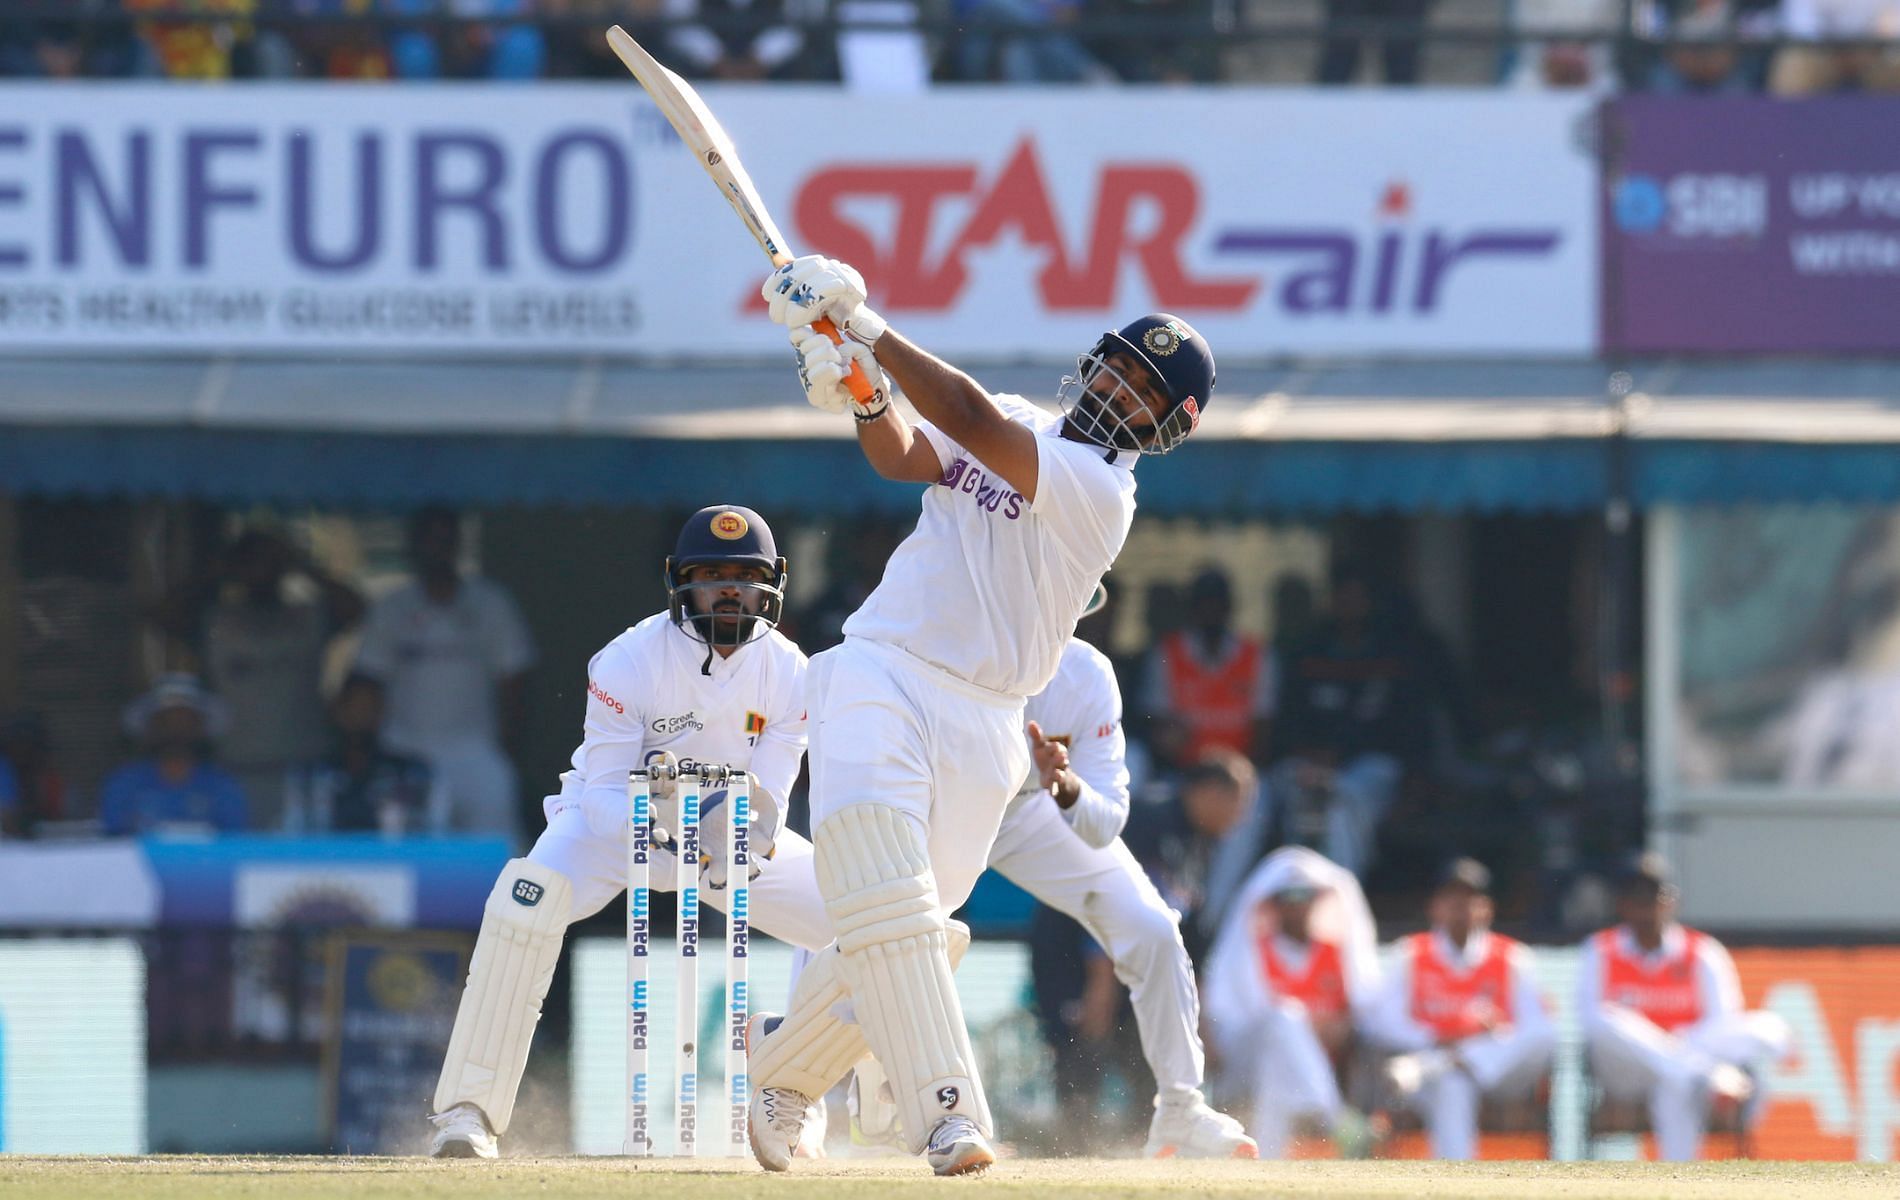 Rishabh Pant played a whirlwind knock in the 1st Test vs Sri Lanka, scoring 96 off 97 deliveries